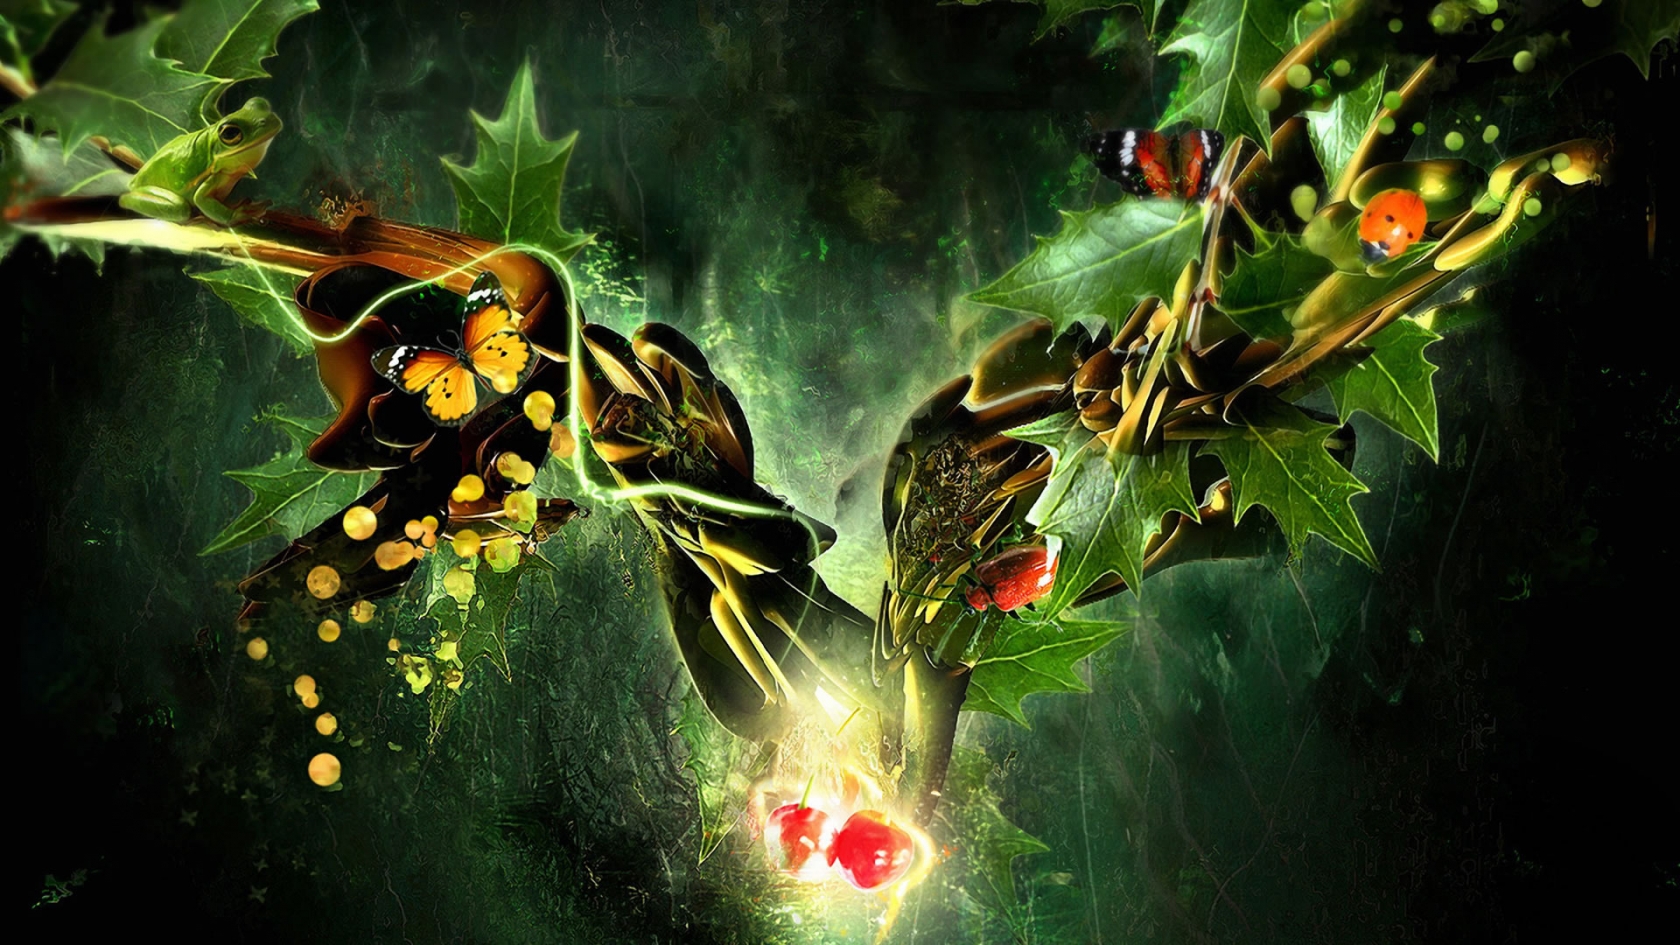 Butterfly, Ladybug, Frog in a Fantasy World for 1680 x 945 HDTV resolution